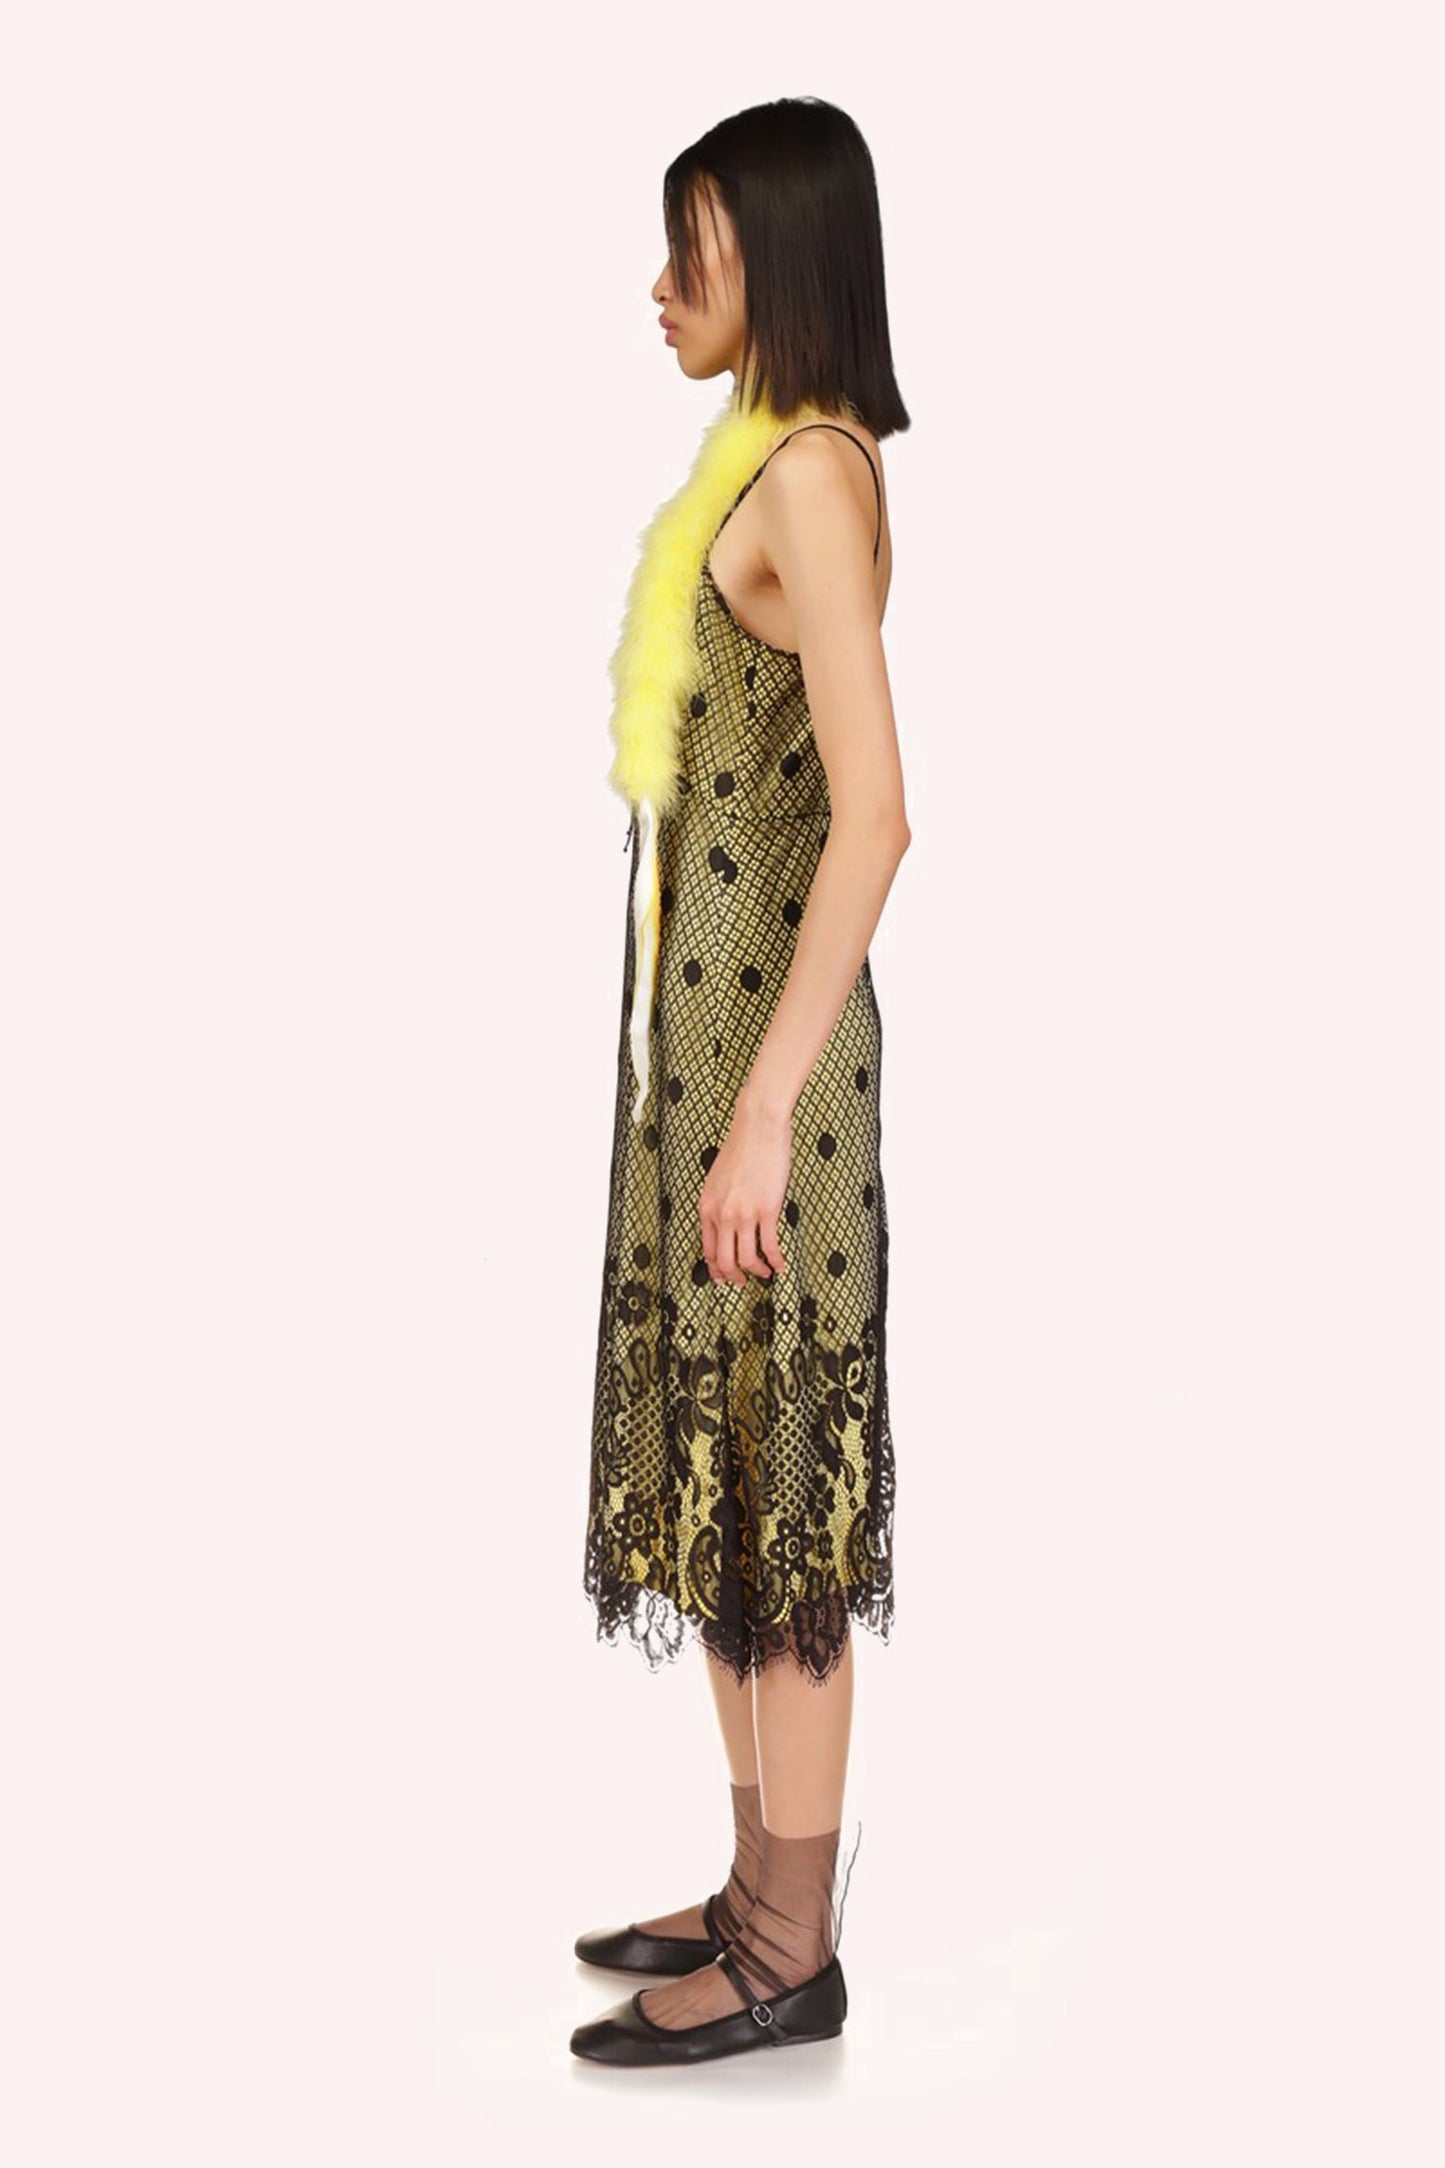 Washed Satin with Lace Dress Canary Yellow/Black, lace at bottom is in a curvy line, cut under arms